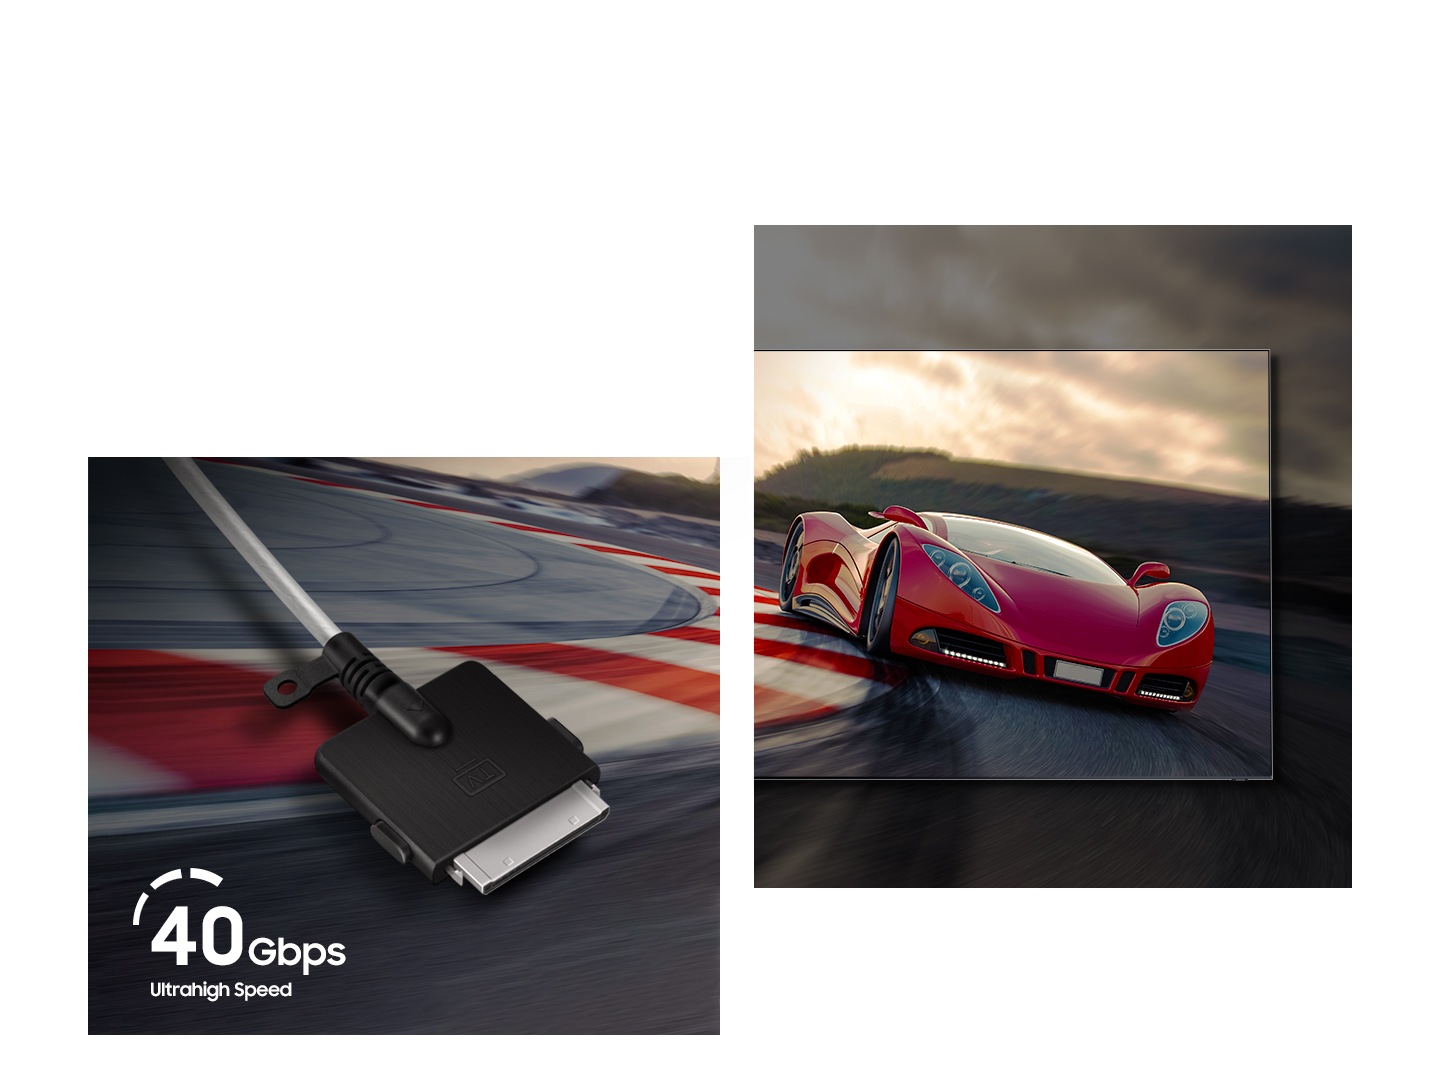 A scene is divided into a red sports car and a closeup of the end of One Connect Cable with "40 Gbps Ultrahigh Speed."